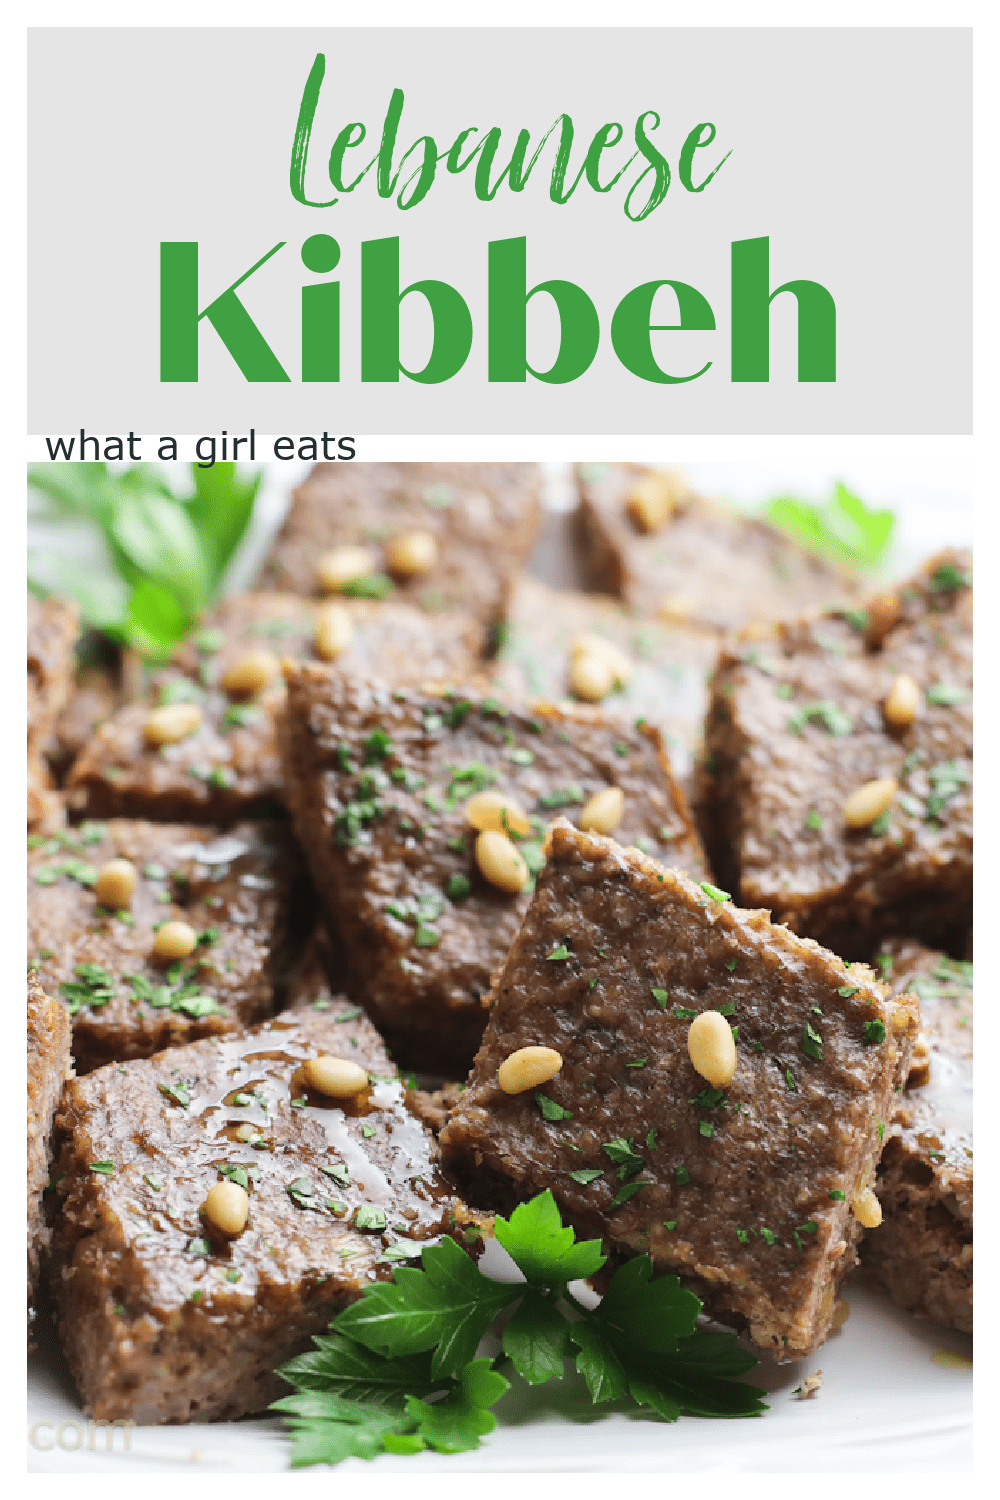 Kibbeh is a traditional Lebanese dish made from ground lamb, spices, pine nuts and bulgur wheat. Serve with pita bread and tzatziki.